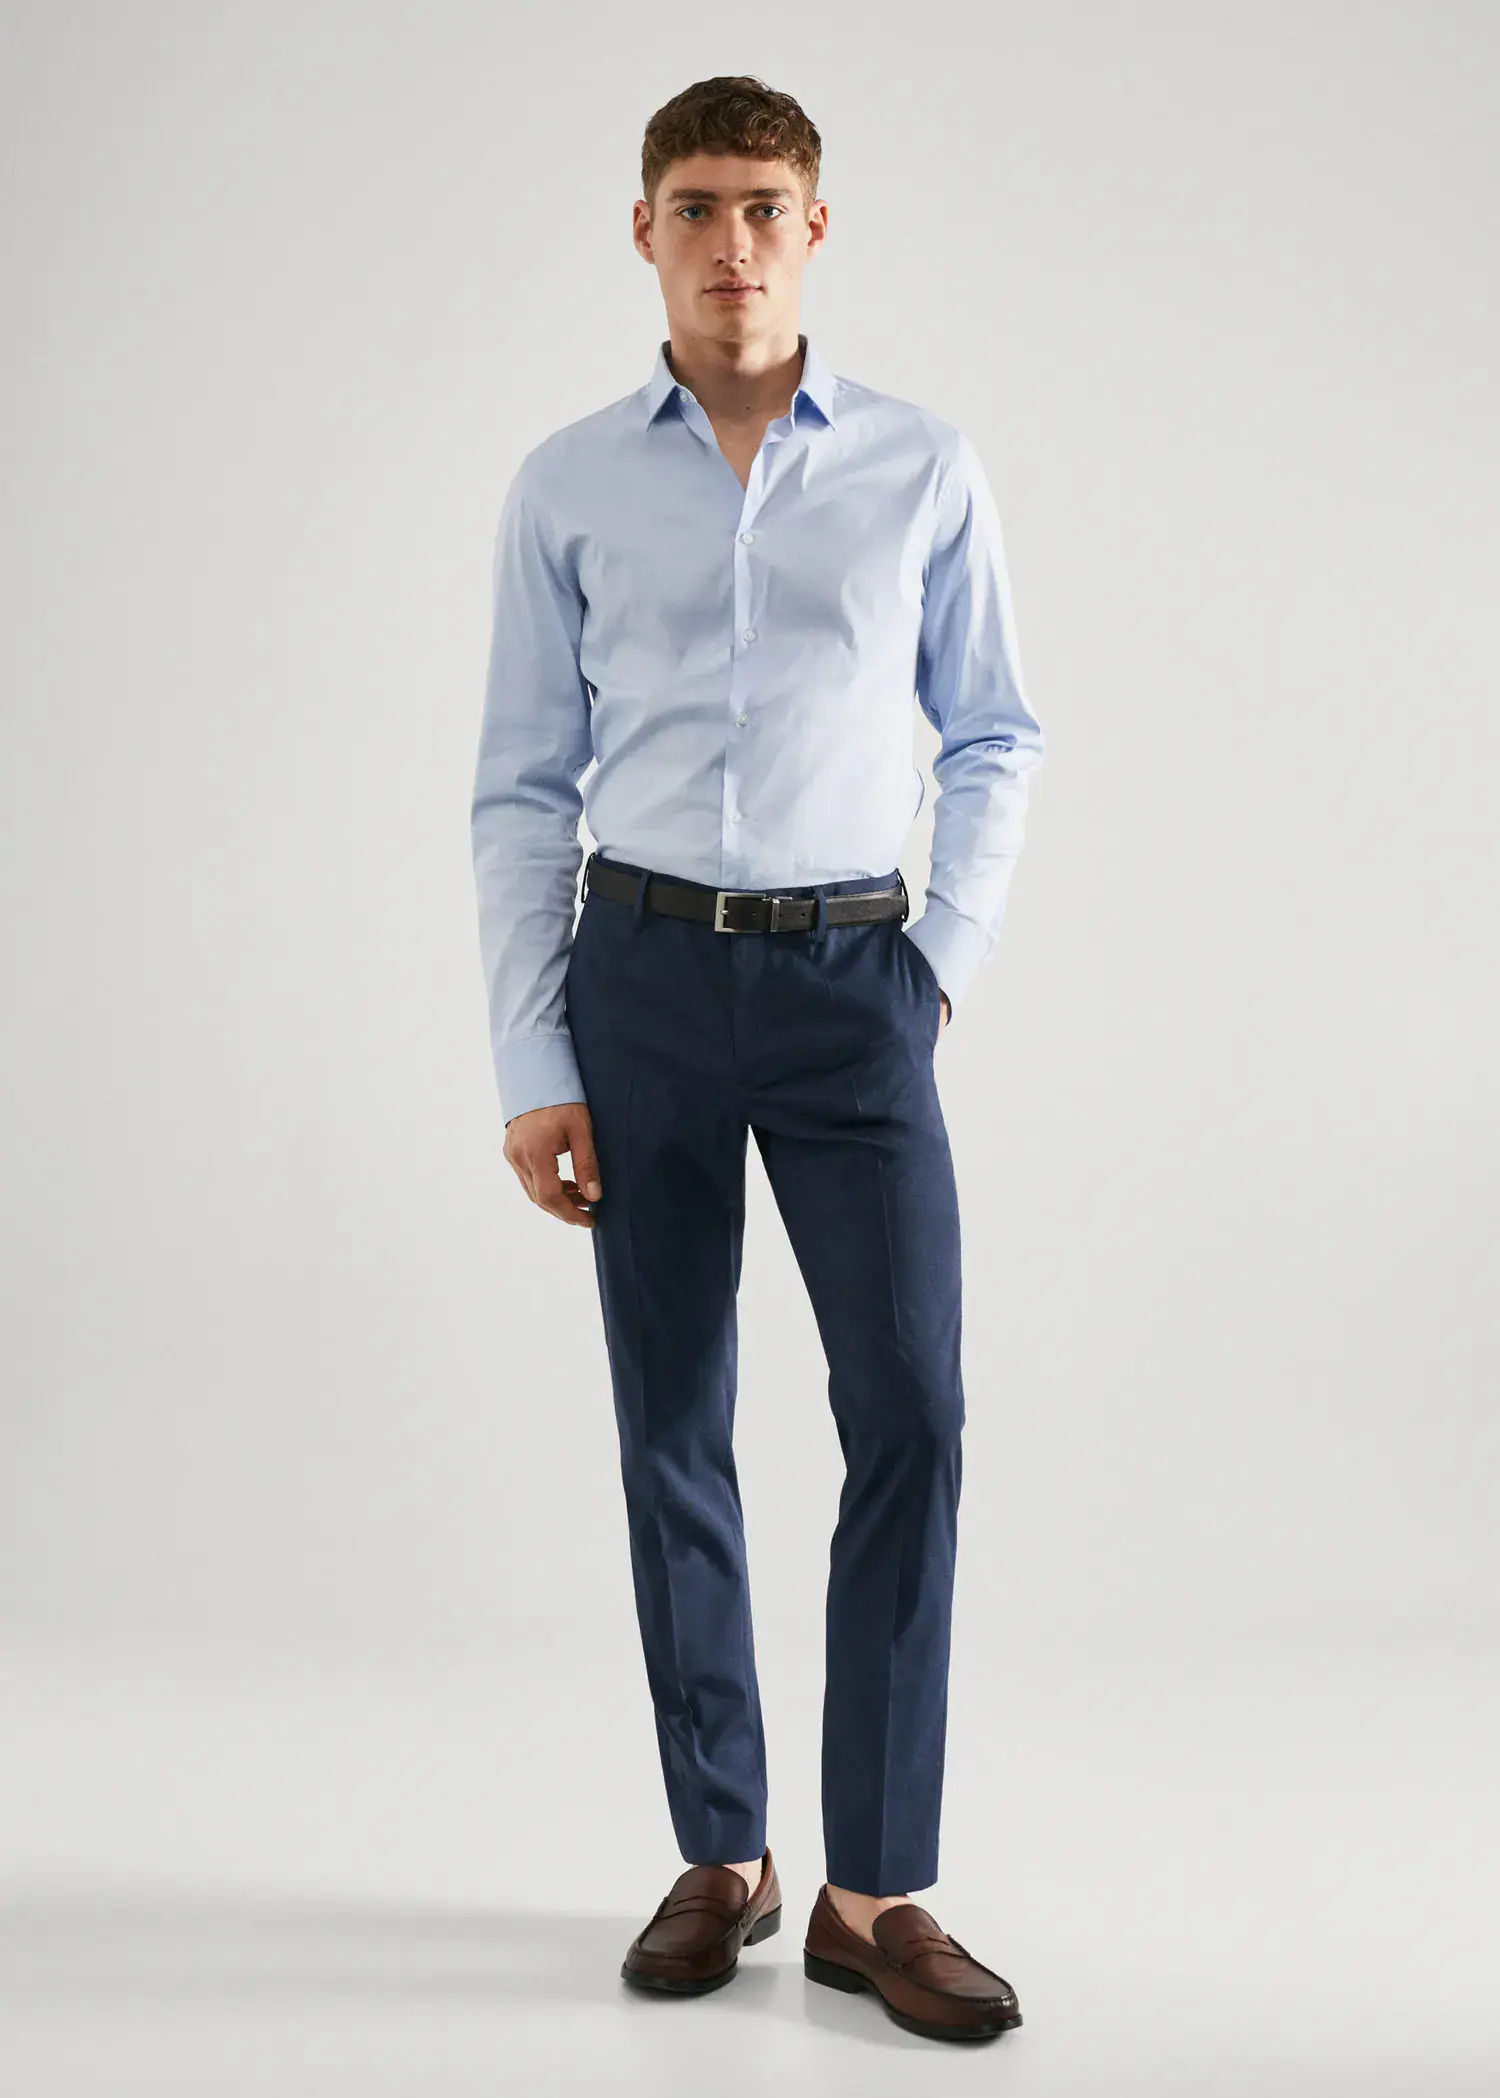 Mango Super slim fit printed suit pants. a man in a blue shirt and blue pants. 